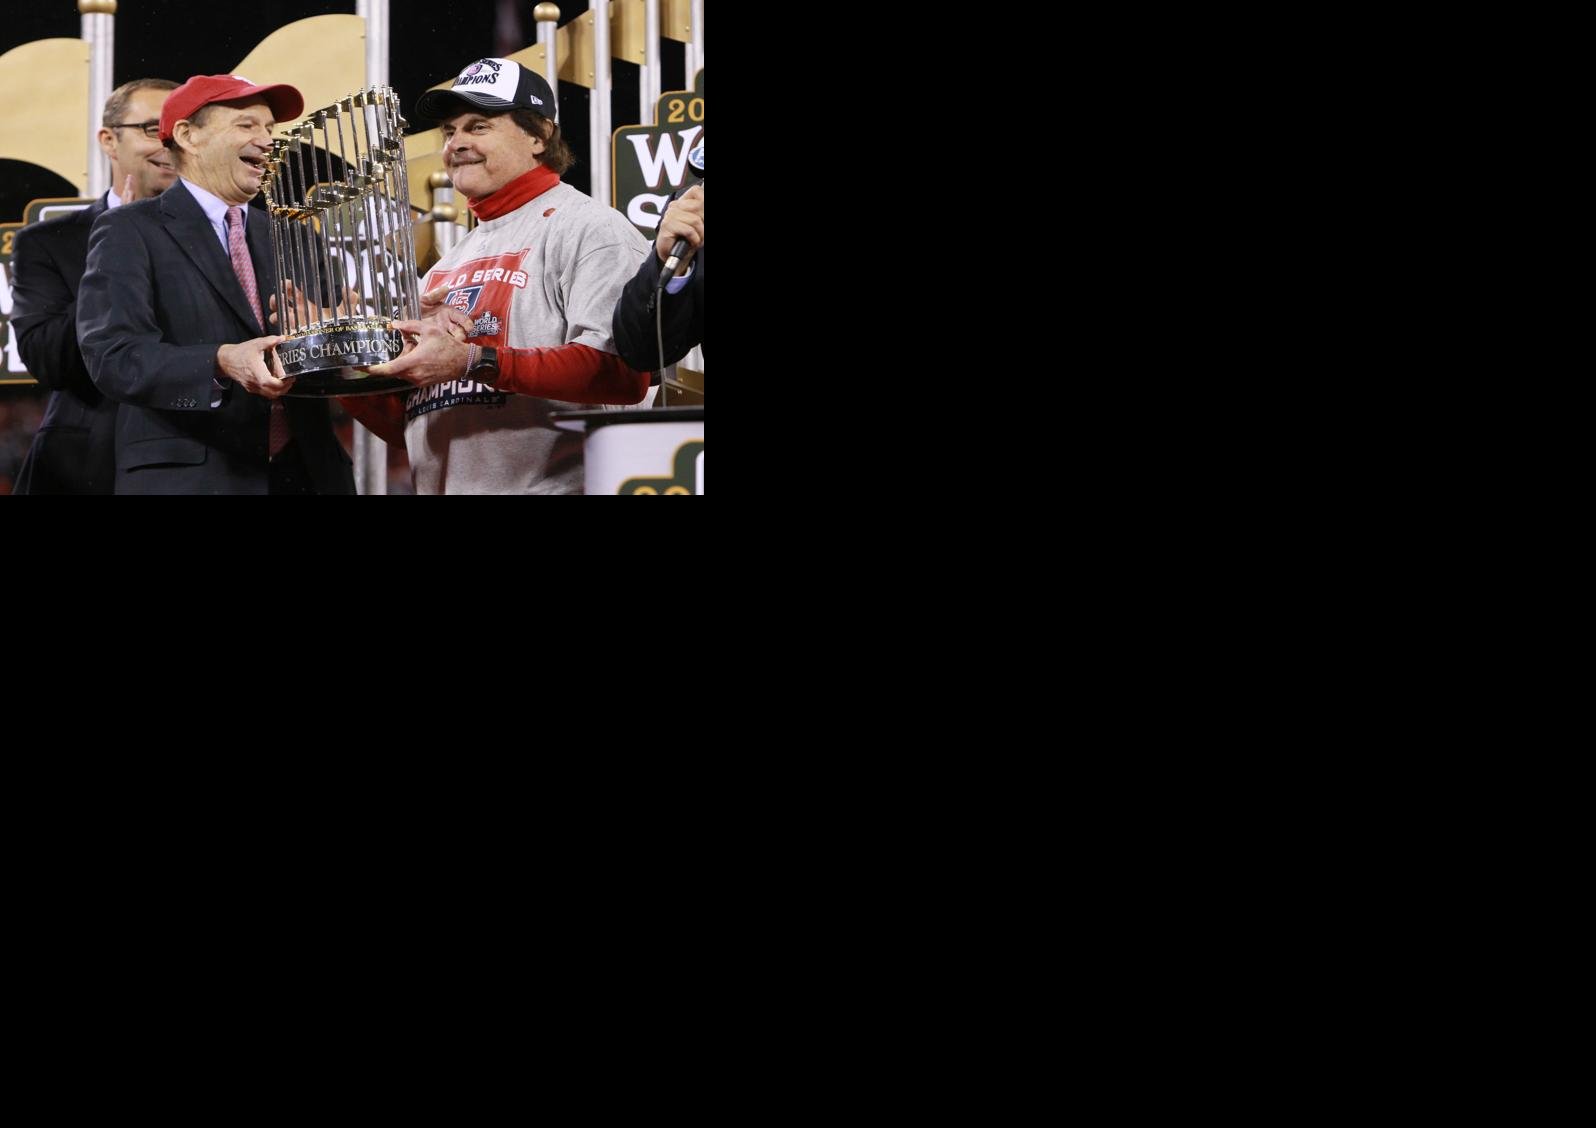 MLB Network - The Cardinals 1967 World Series Trophy on display before Game  Four of the World Series in St. Louis.